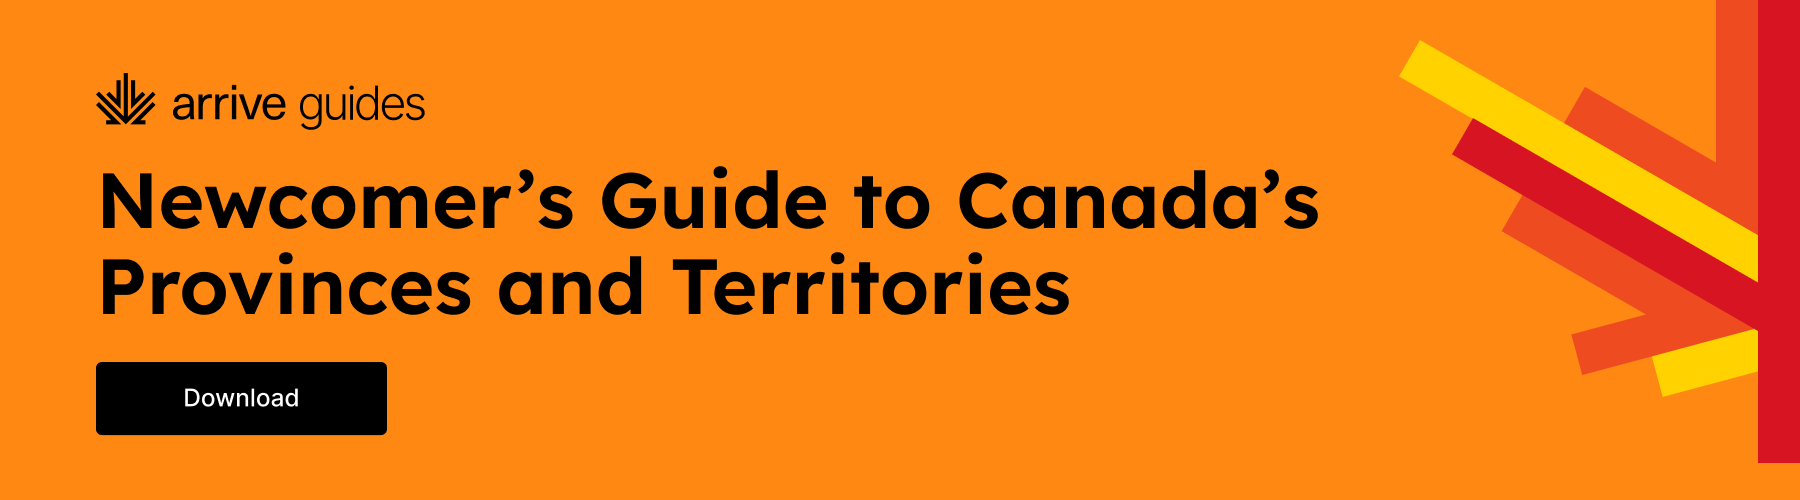 Download the newcomer's guide to Canada's provinces and territories